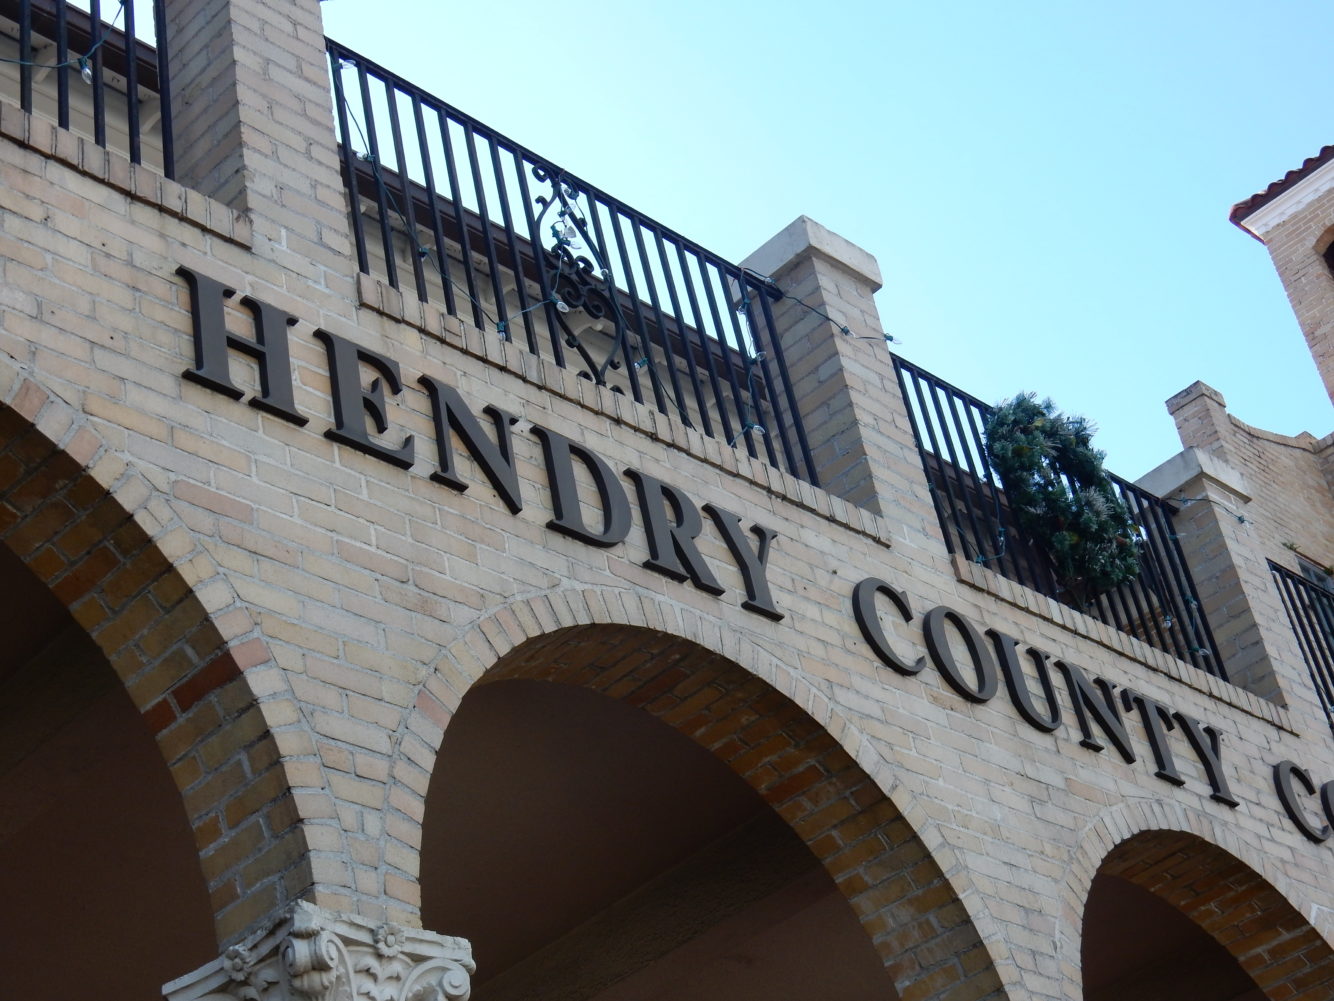 A closeup of the hendry county court building signage on the front of the building